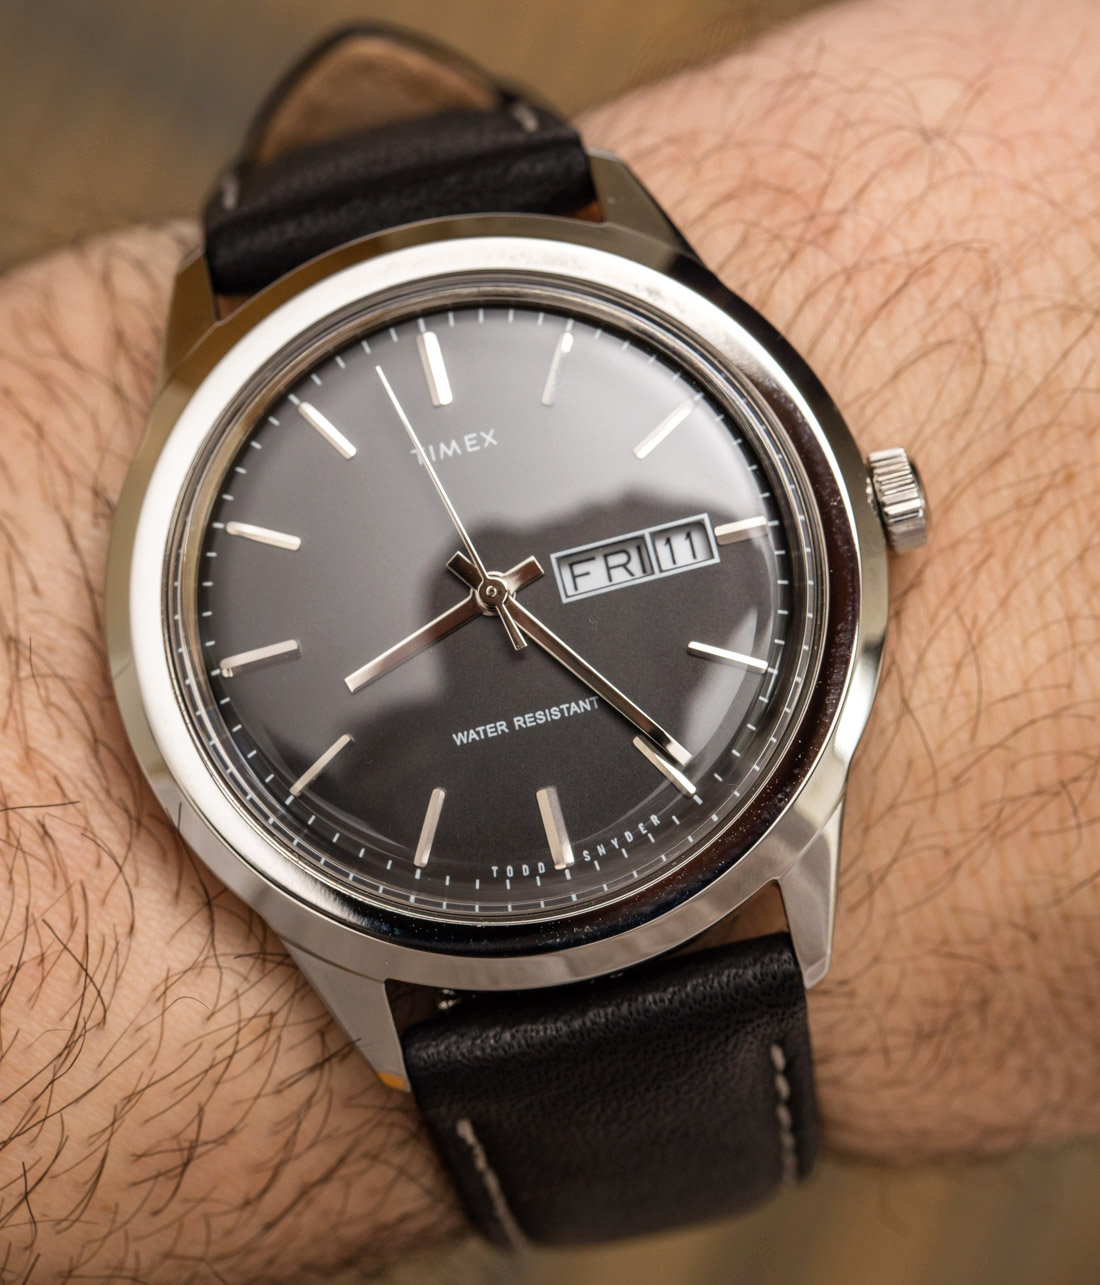 Timex + Todd Snyder Mid Century Watch Hands-On | aBlogtoWatch